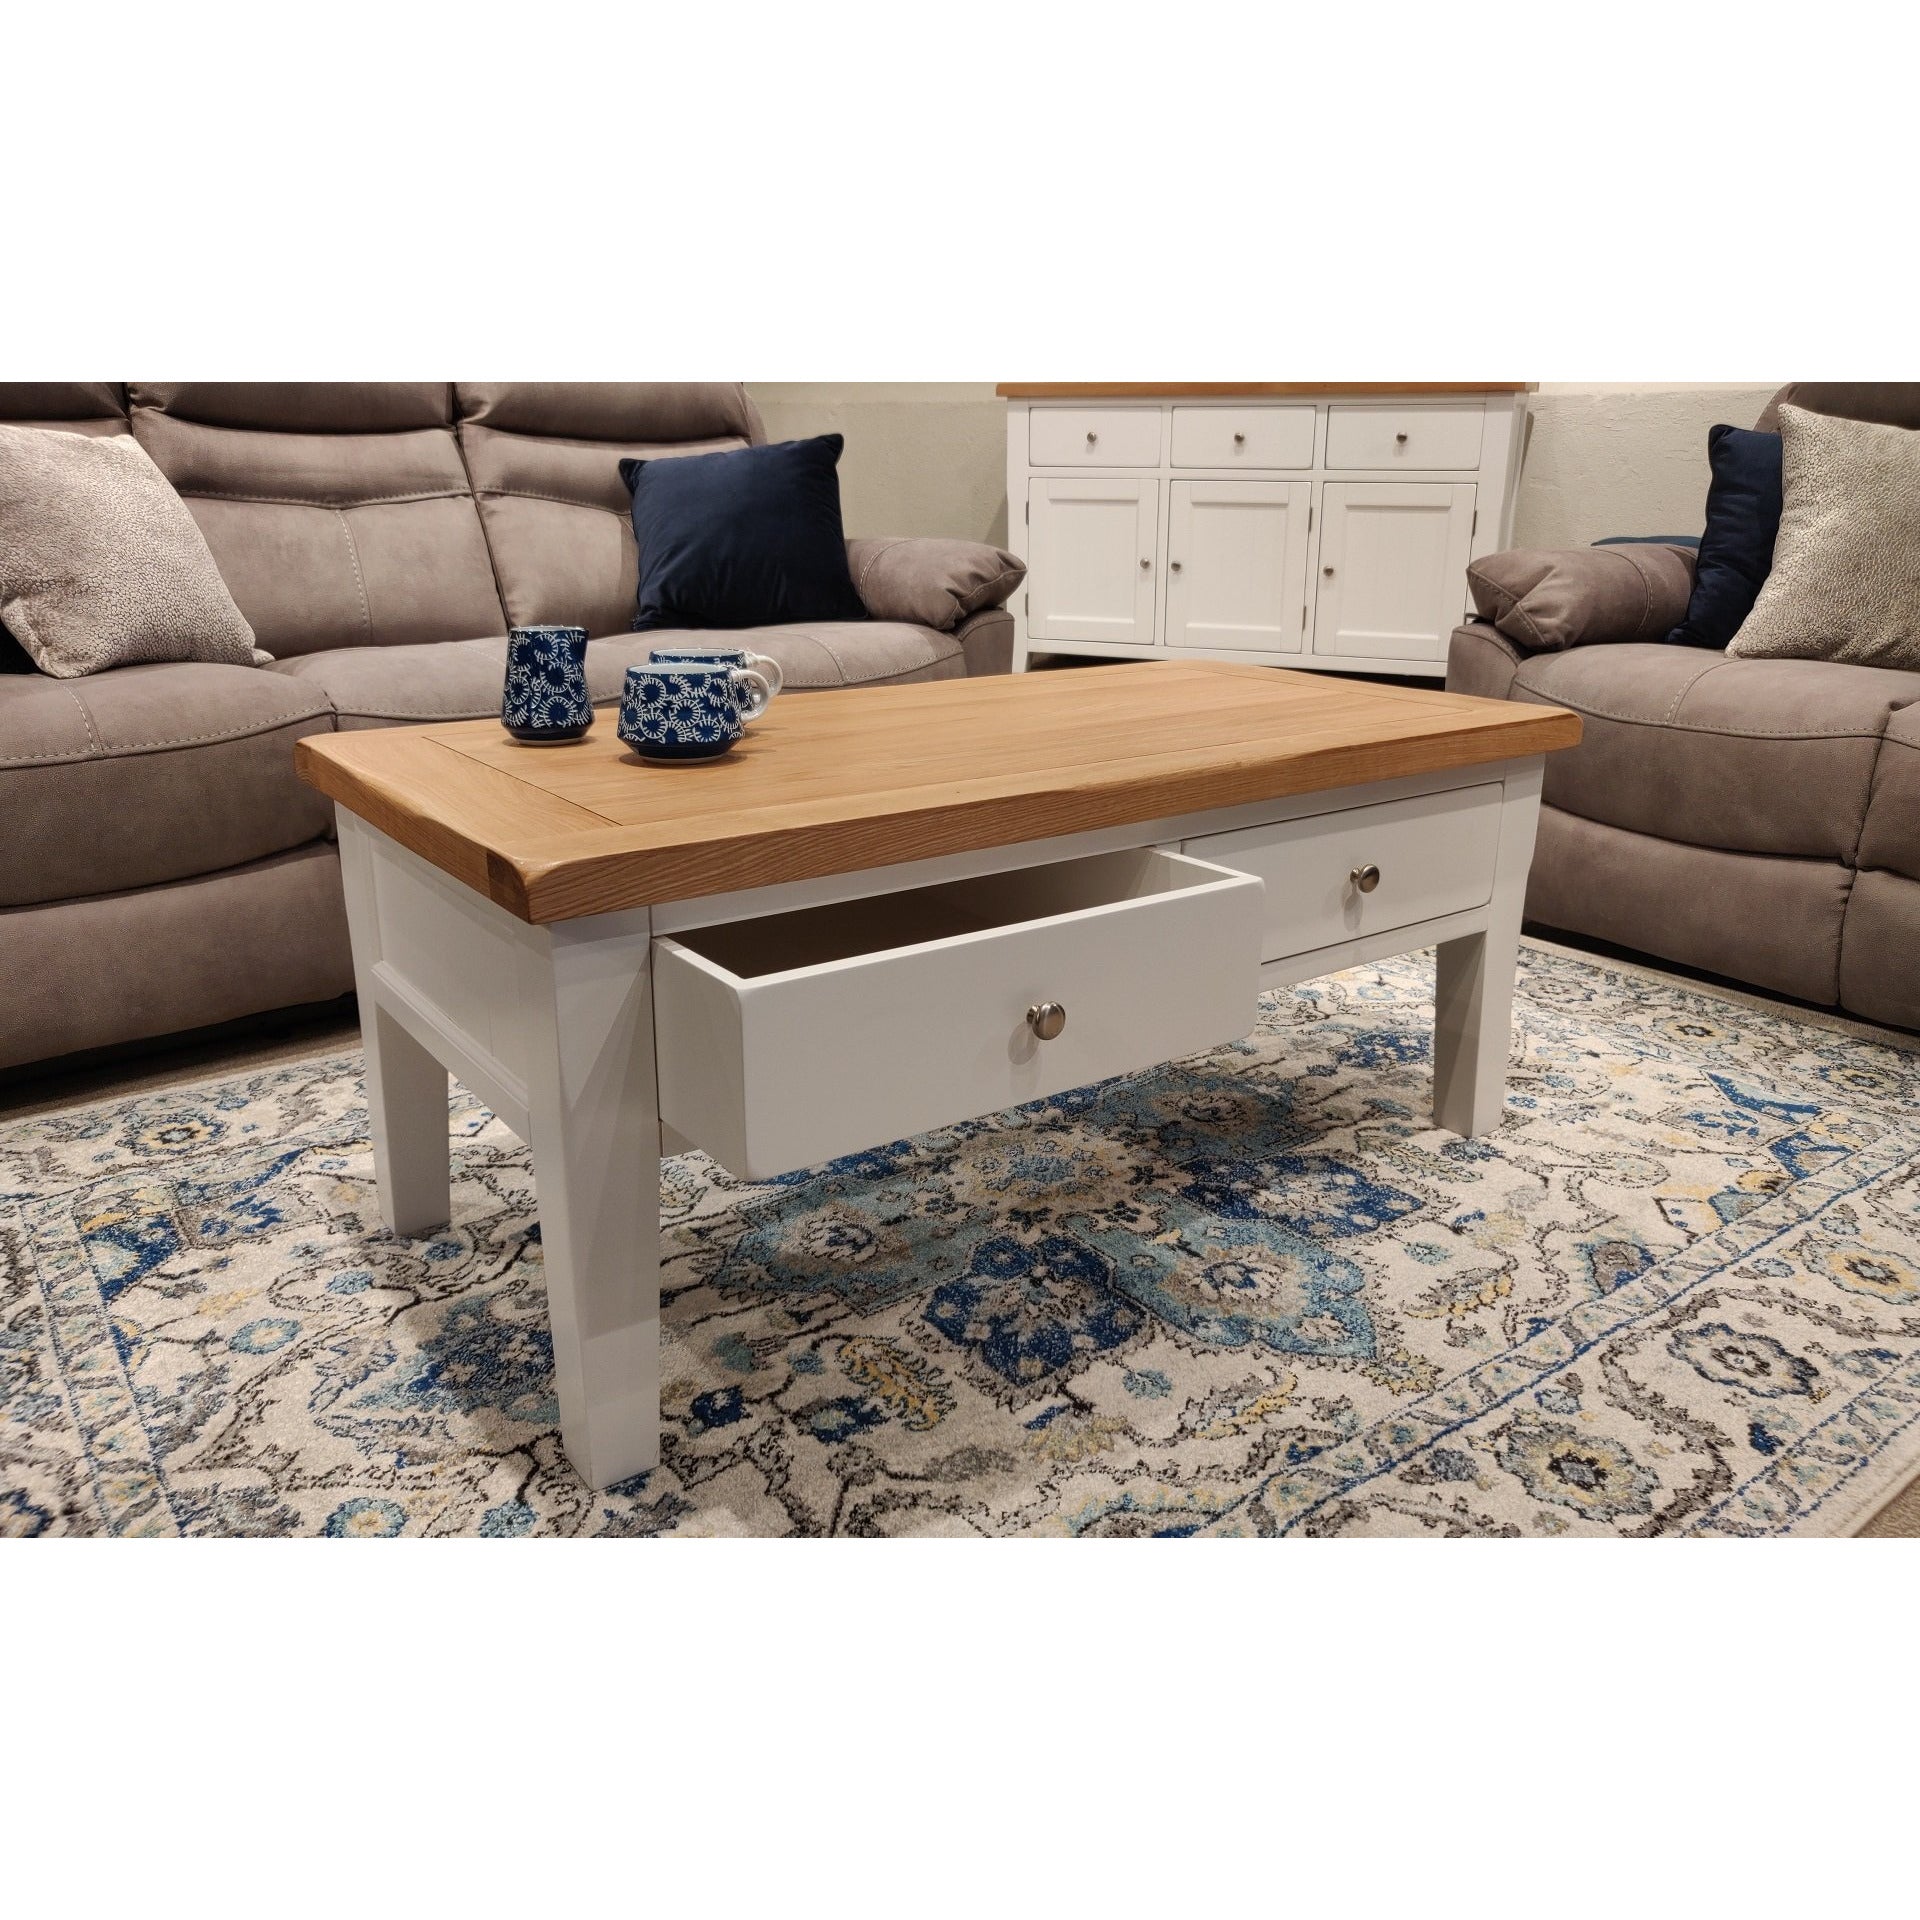 Somerset Coffee Table from Upstairs Downstairs Furniture in Lisburn, Monaghan and Enniskillen